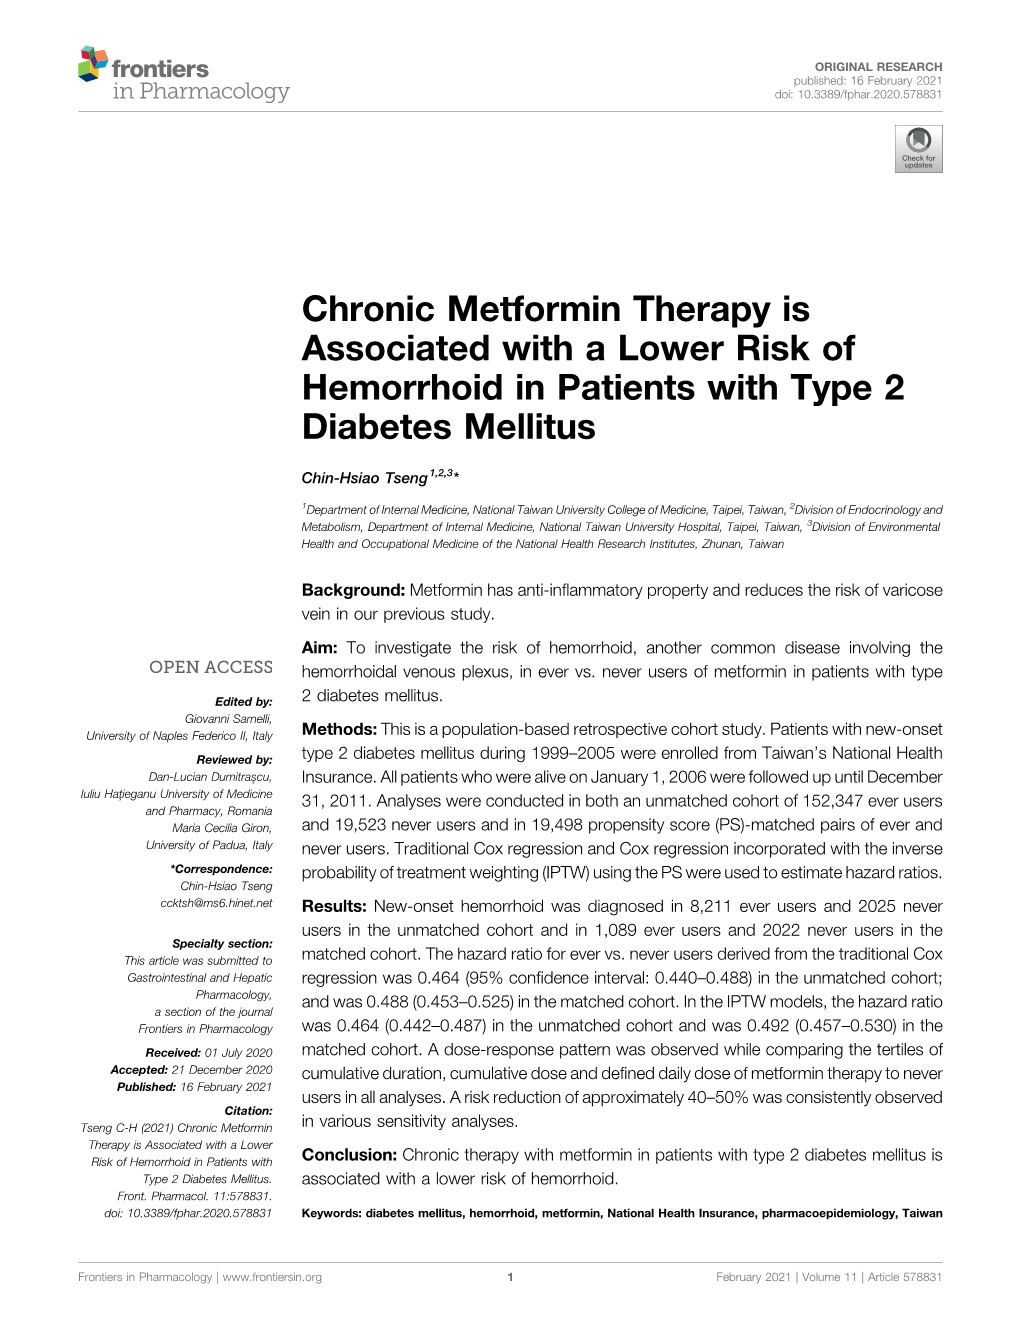 Chronic Metformin Therapy Is Associated with a Lower Risk of Hemorrhoid in Patients with Type 2 Diabetes Mellitus